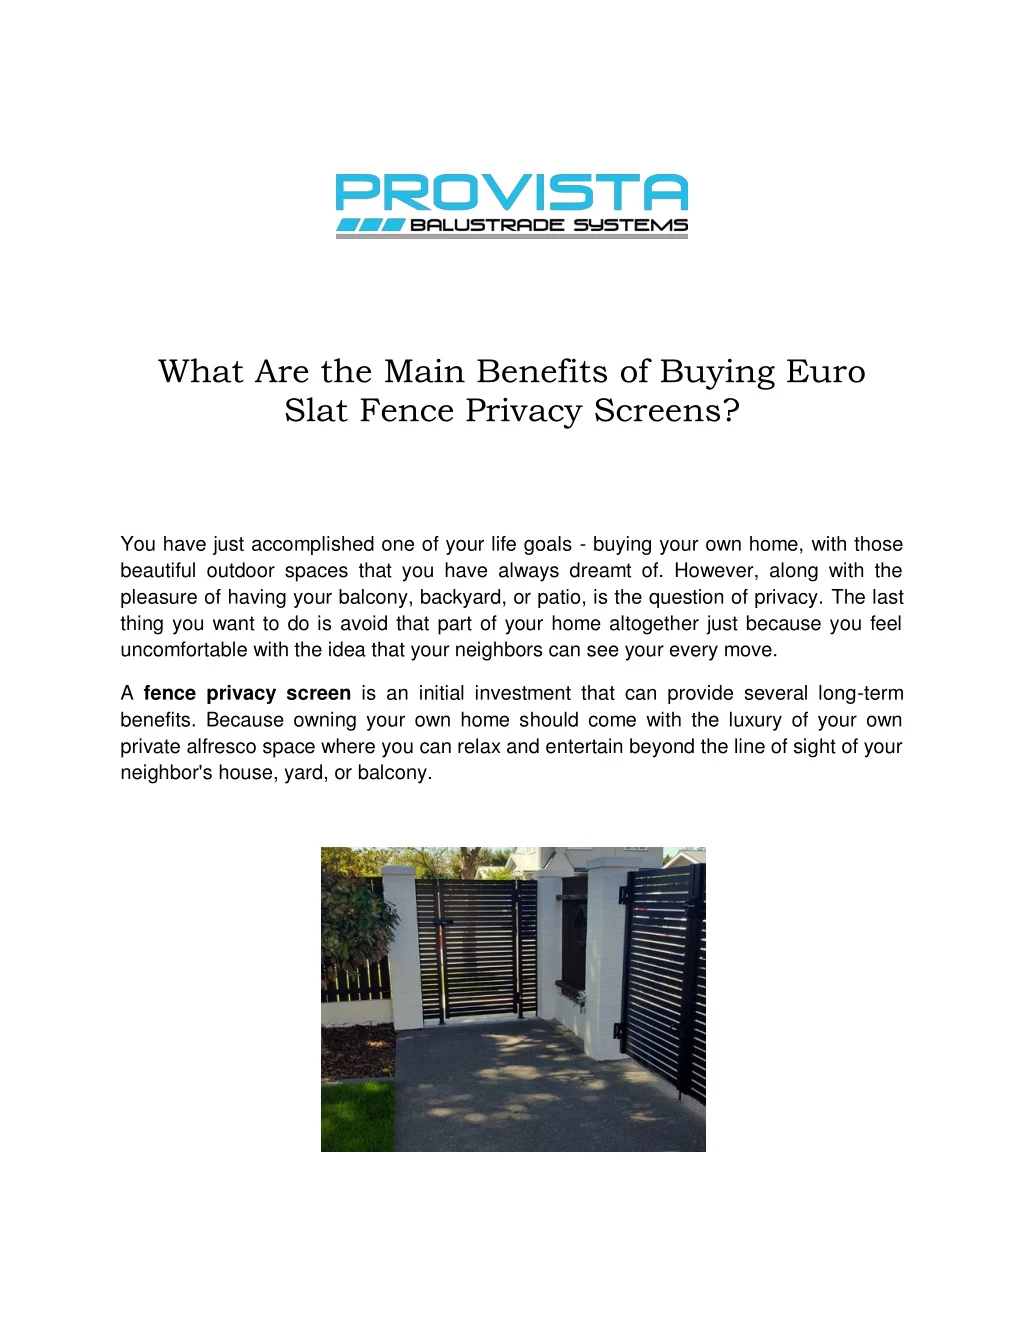 what are the main benefits of buying euro slat